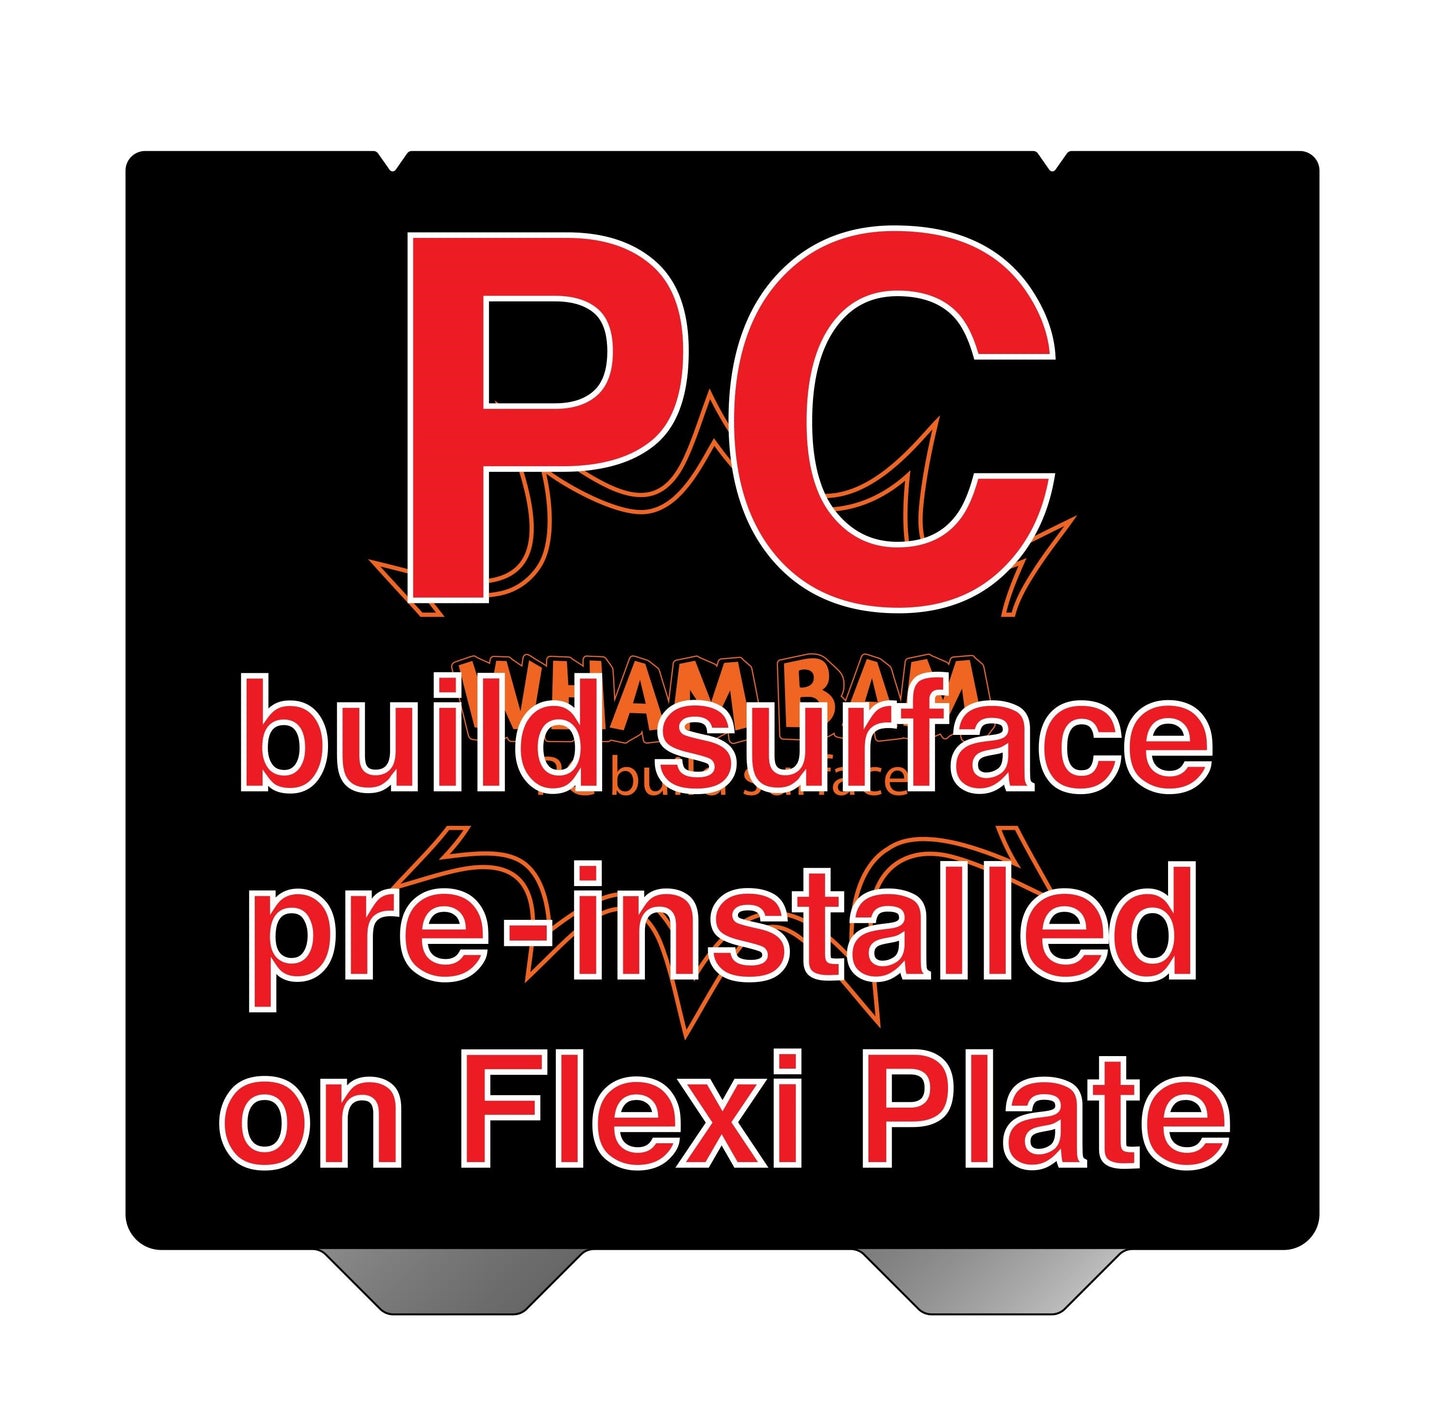 Flexi Plate with Pre-Installed PC Build Surface (Classic Black) - 254 x 235 - Prusa i3 MK3/S/+, Raise3D N1, MatterHackers Pulse